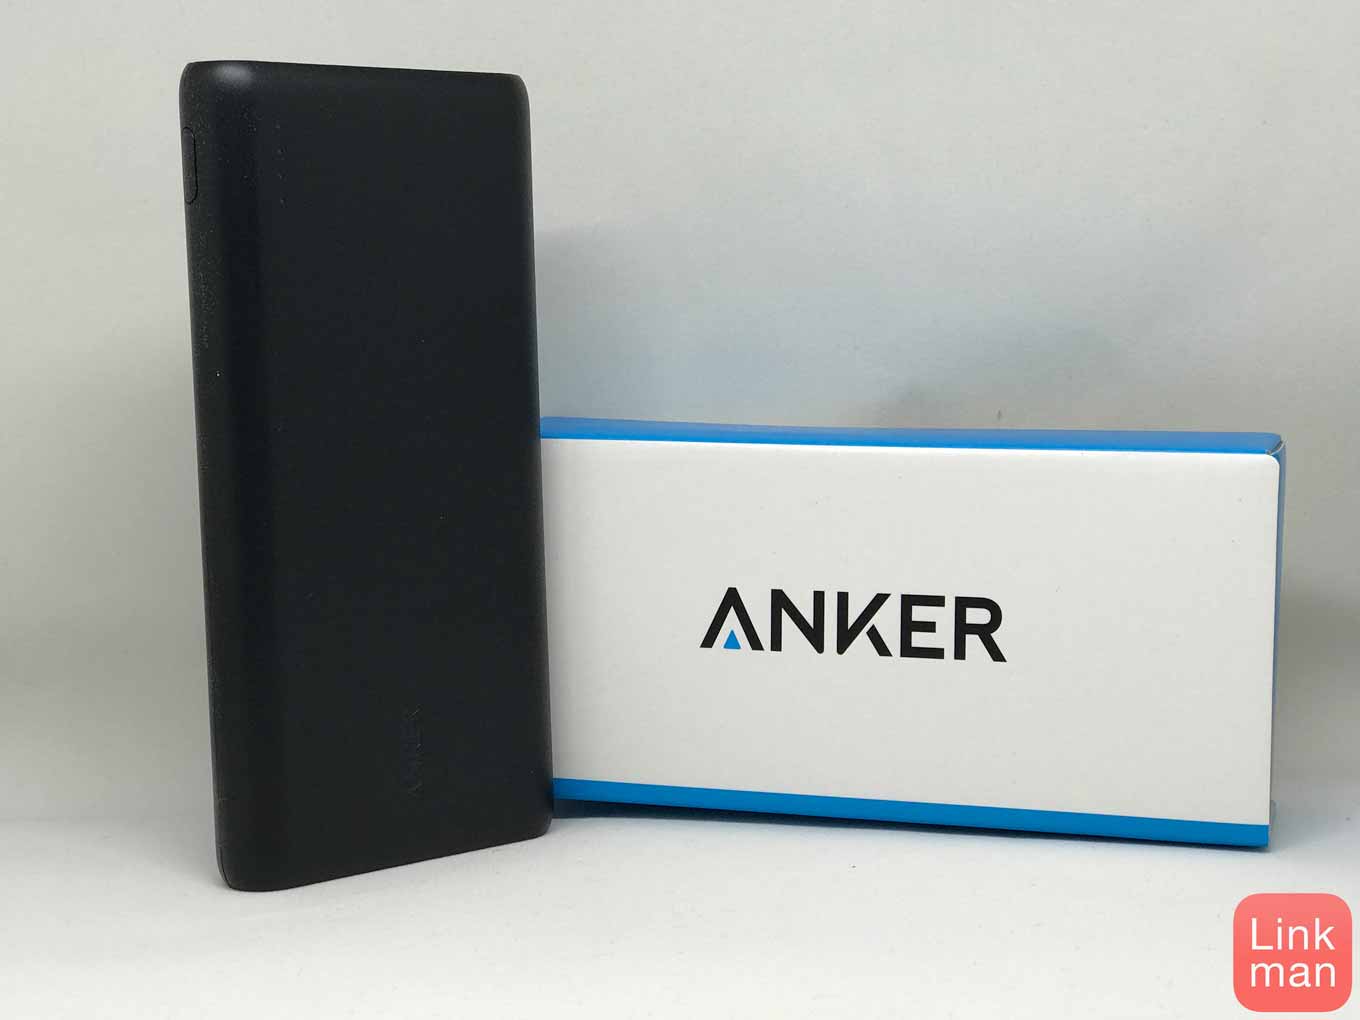 Anker、Qualcomm Quick Charge 3.0に対応したモバイルバッテリー「Anker PowerCore Speed 20000 QC」販売開始